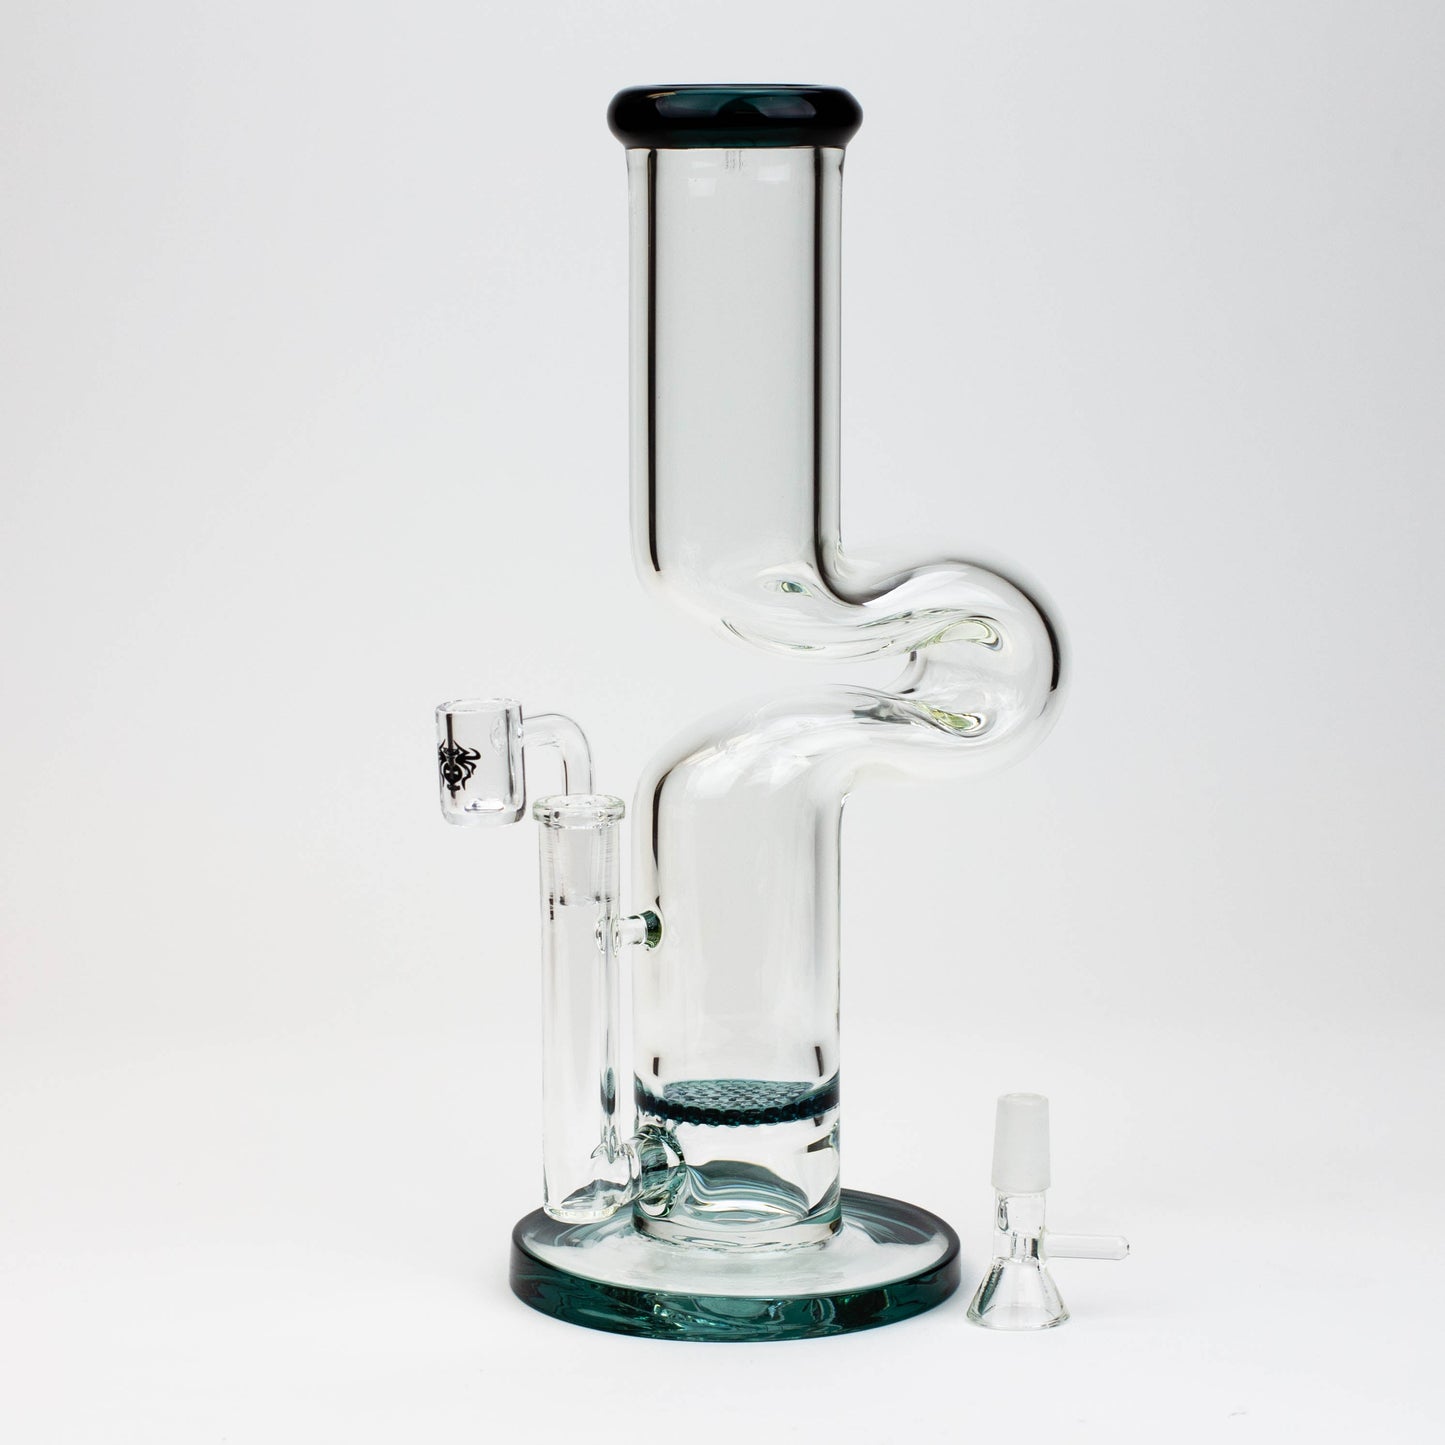 11.5" 2-in-1 7mm Kink glass water bong_7